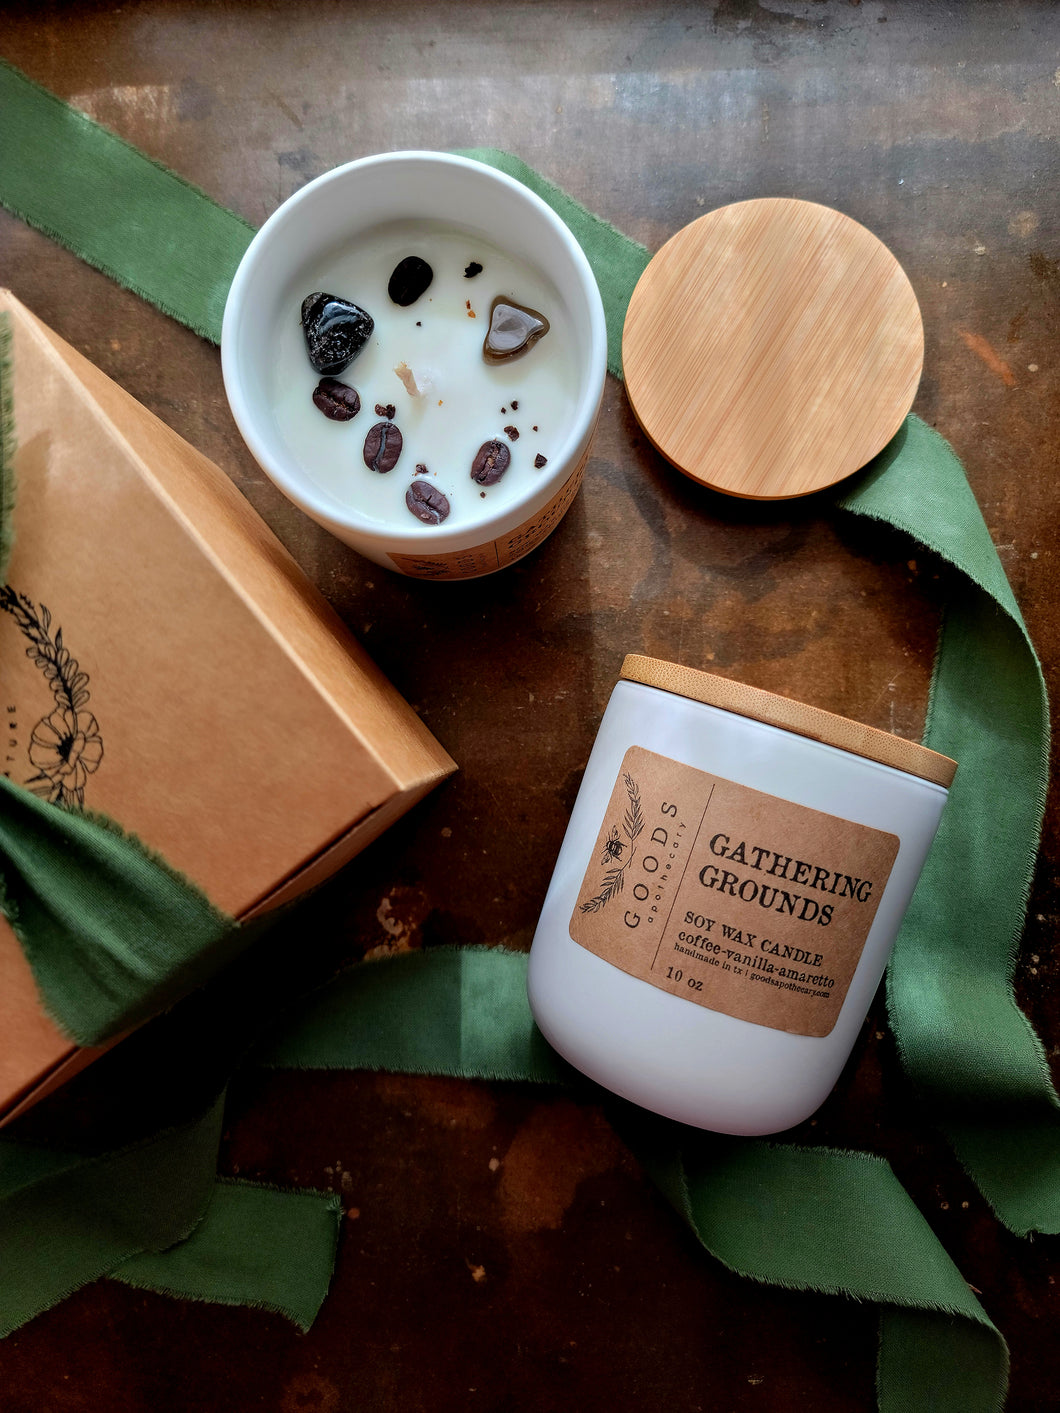 Gathering Grounds Soy Wax Candle